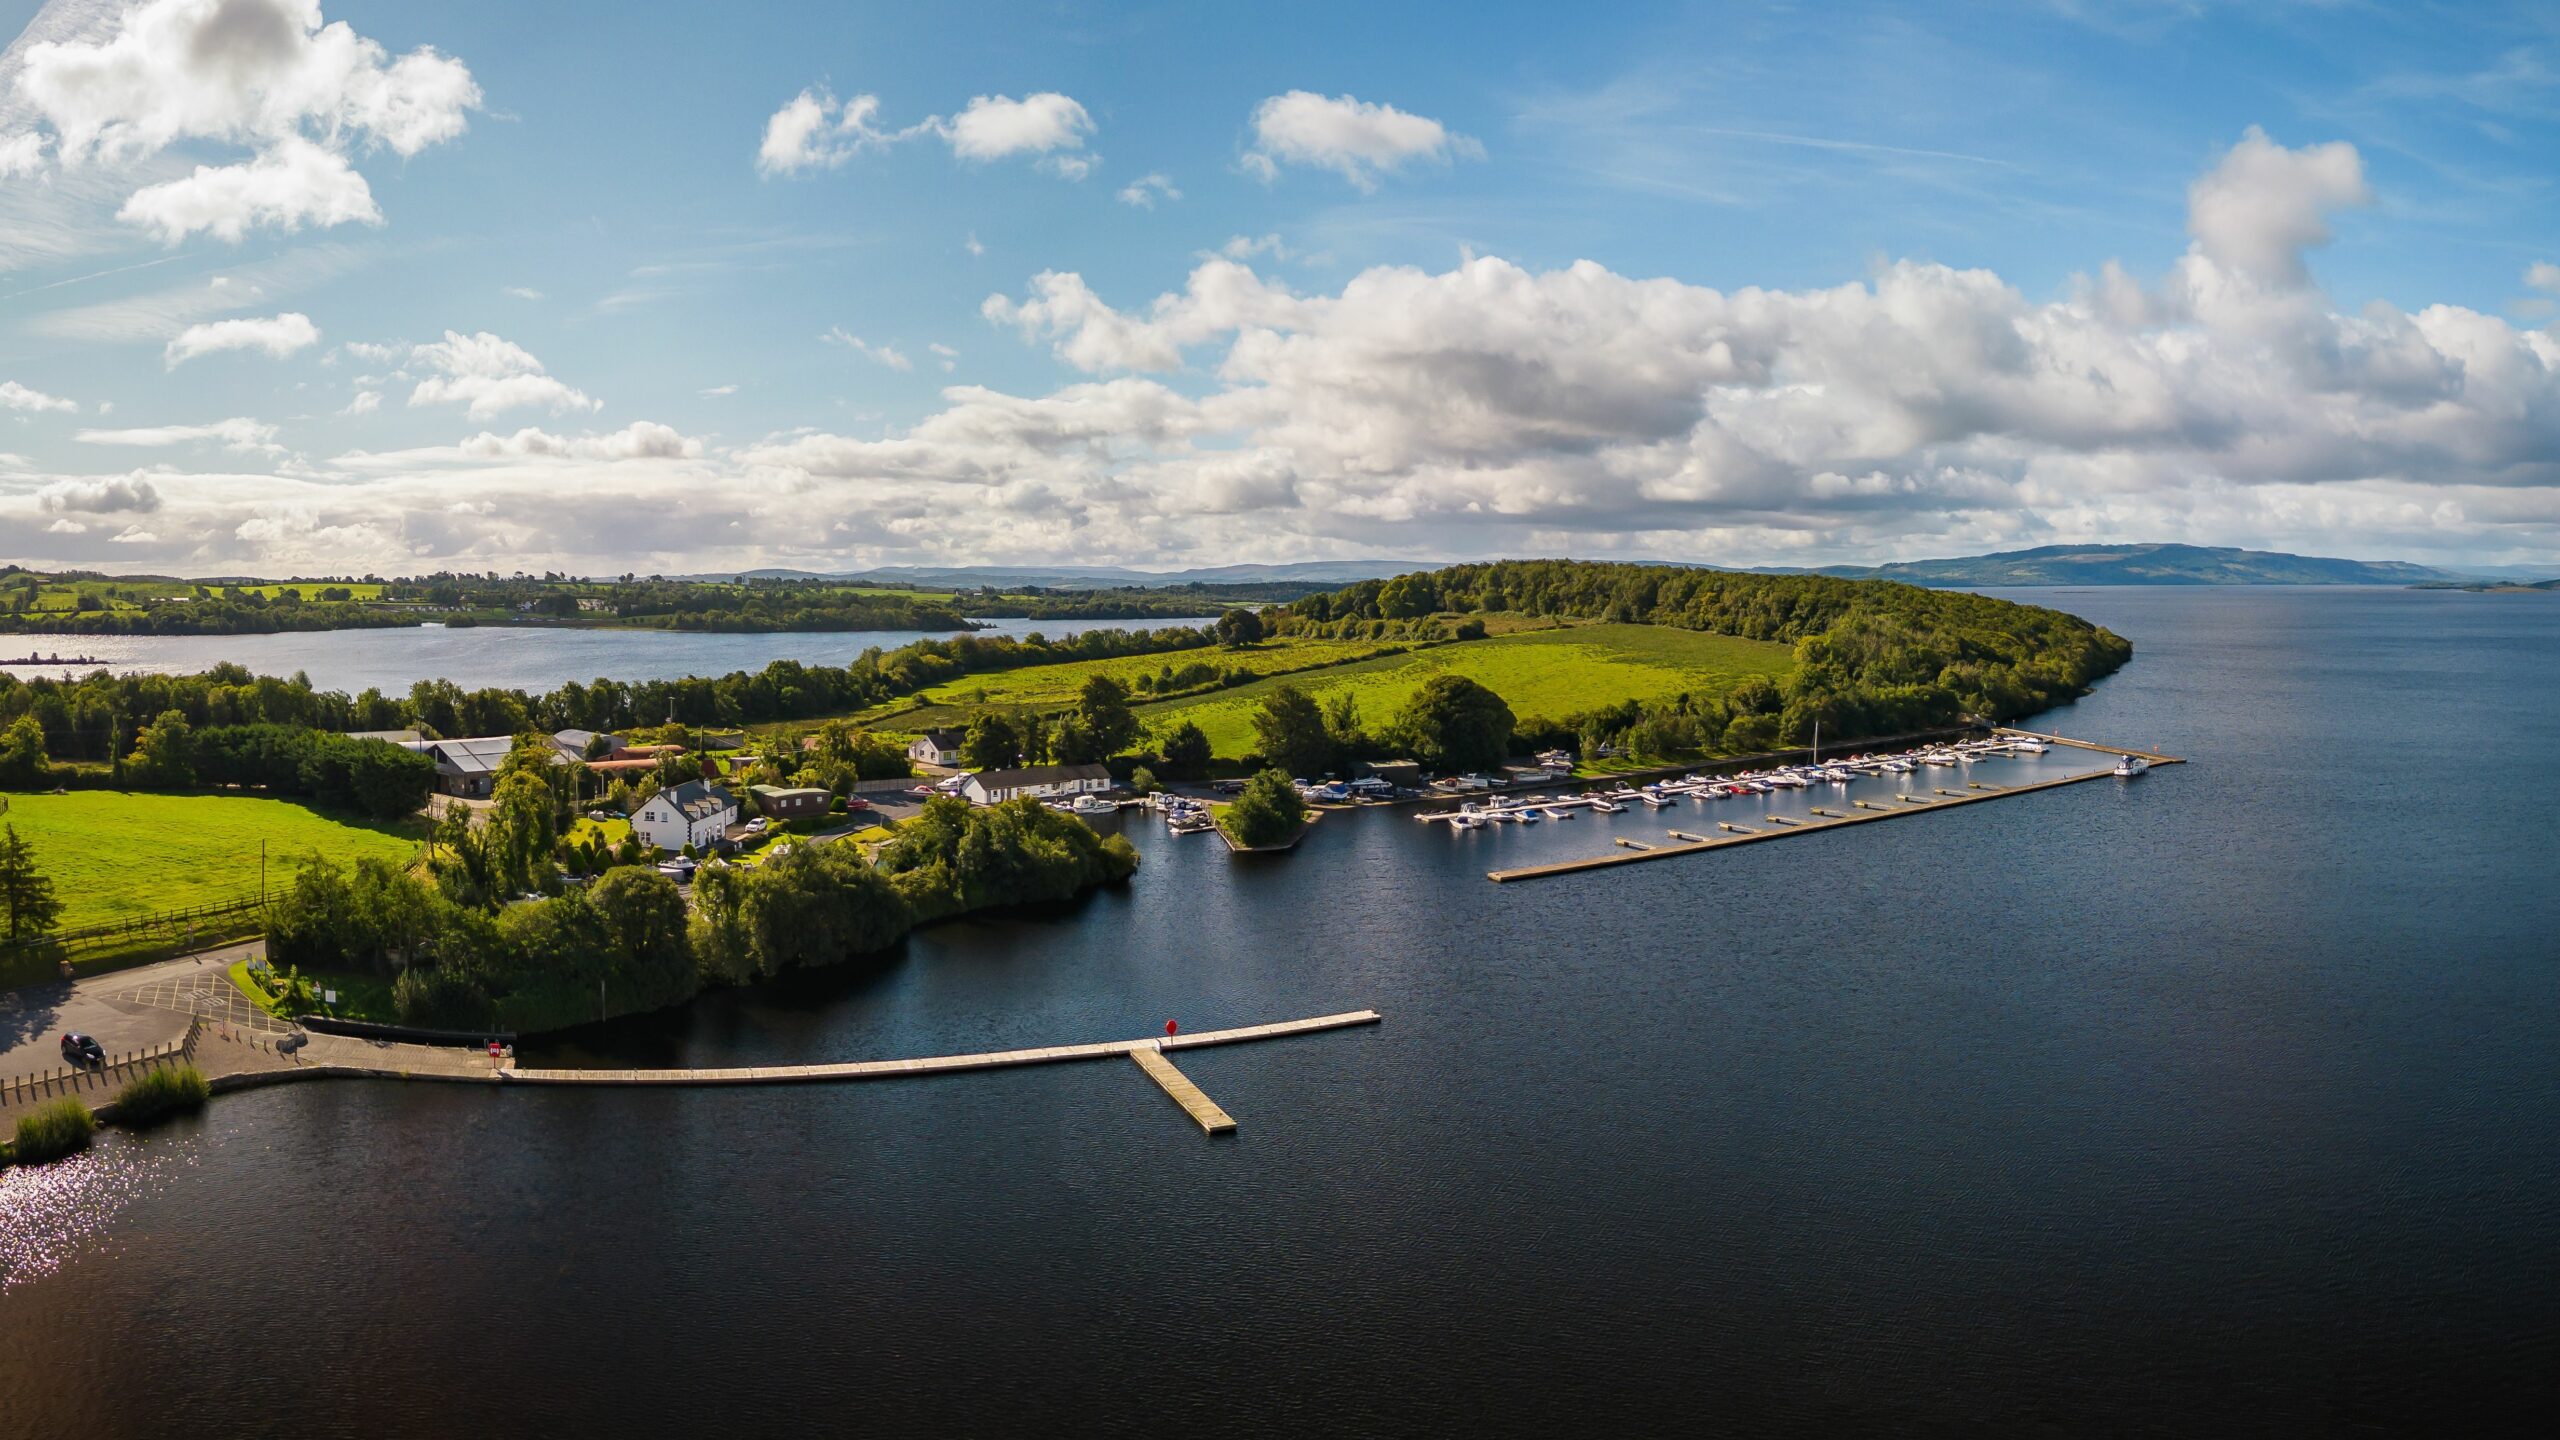 Aerial view of island with parked boats in Fermanagh